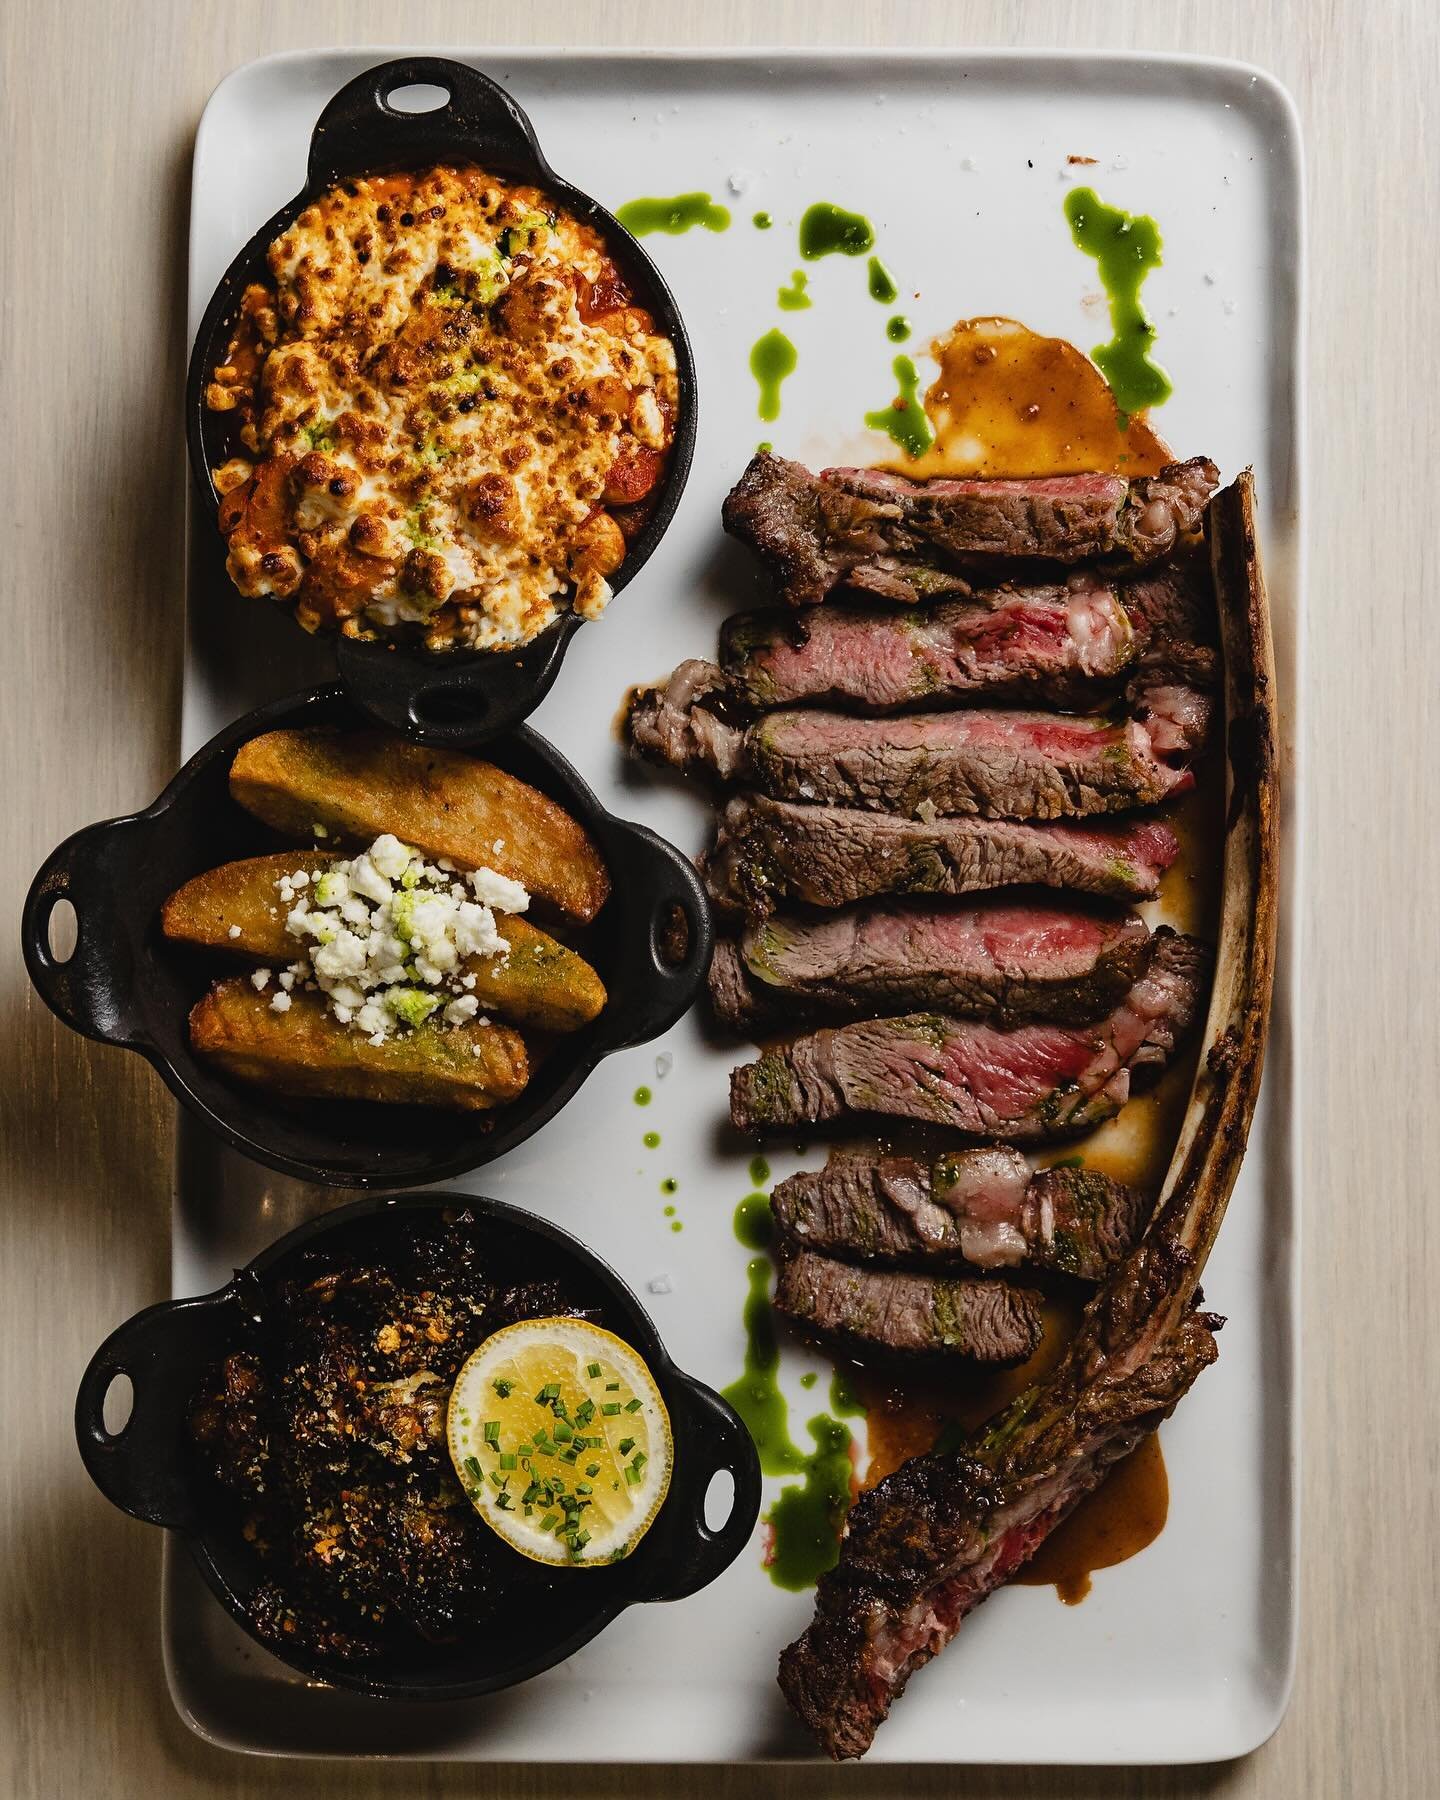 Join us for Tomahawk Tuesday at @noemahuntington and claim your seat at the table! Delight in $99 Tomahawks alongside $40 select bottles of wine. Available exclusively every Tuesday!

#NOEMA #Huntington #LongIsland